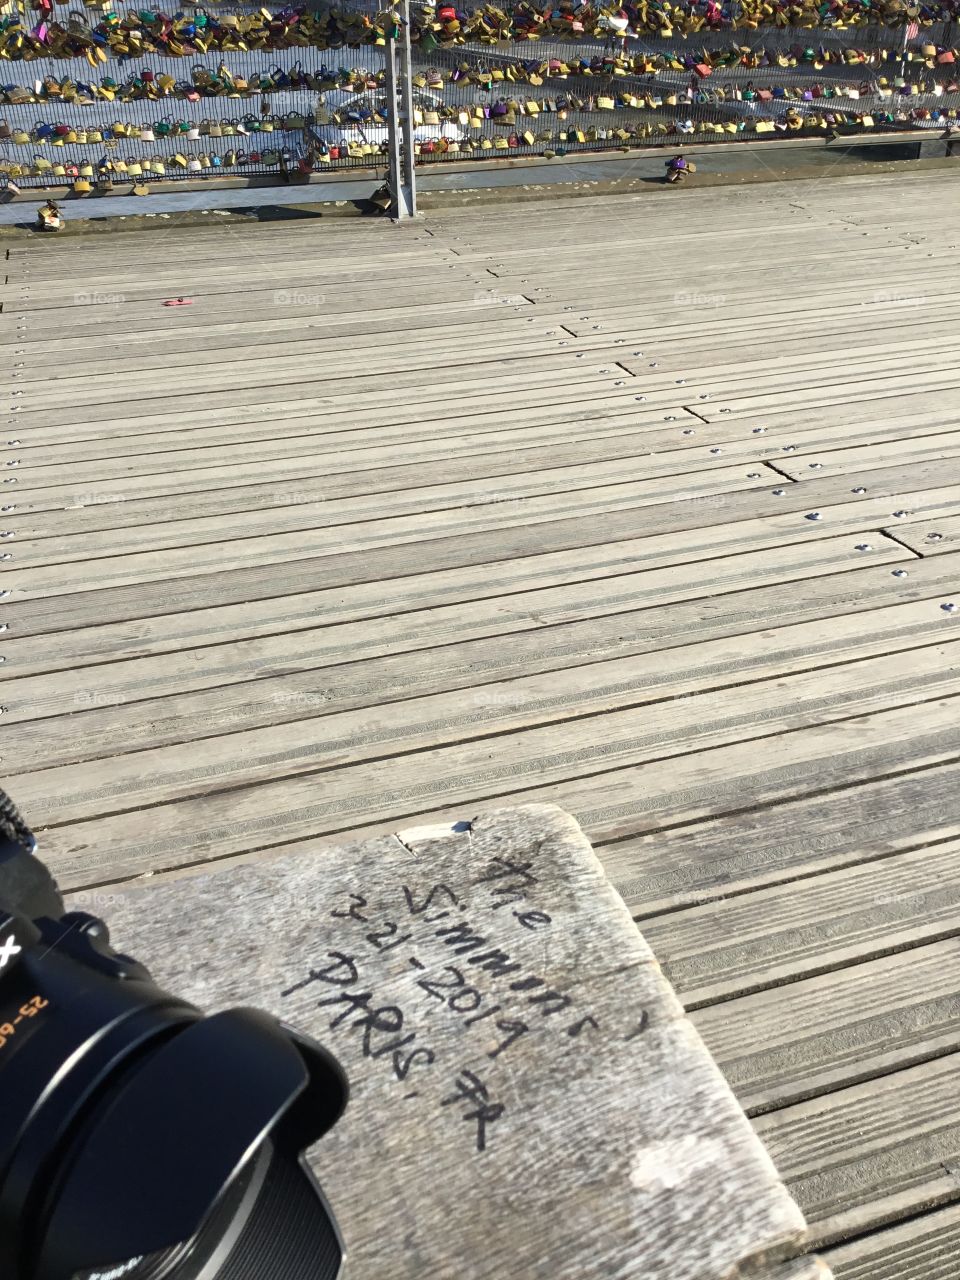 Left my inscription on the bench in Paris, France